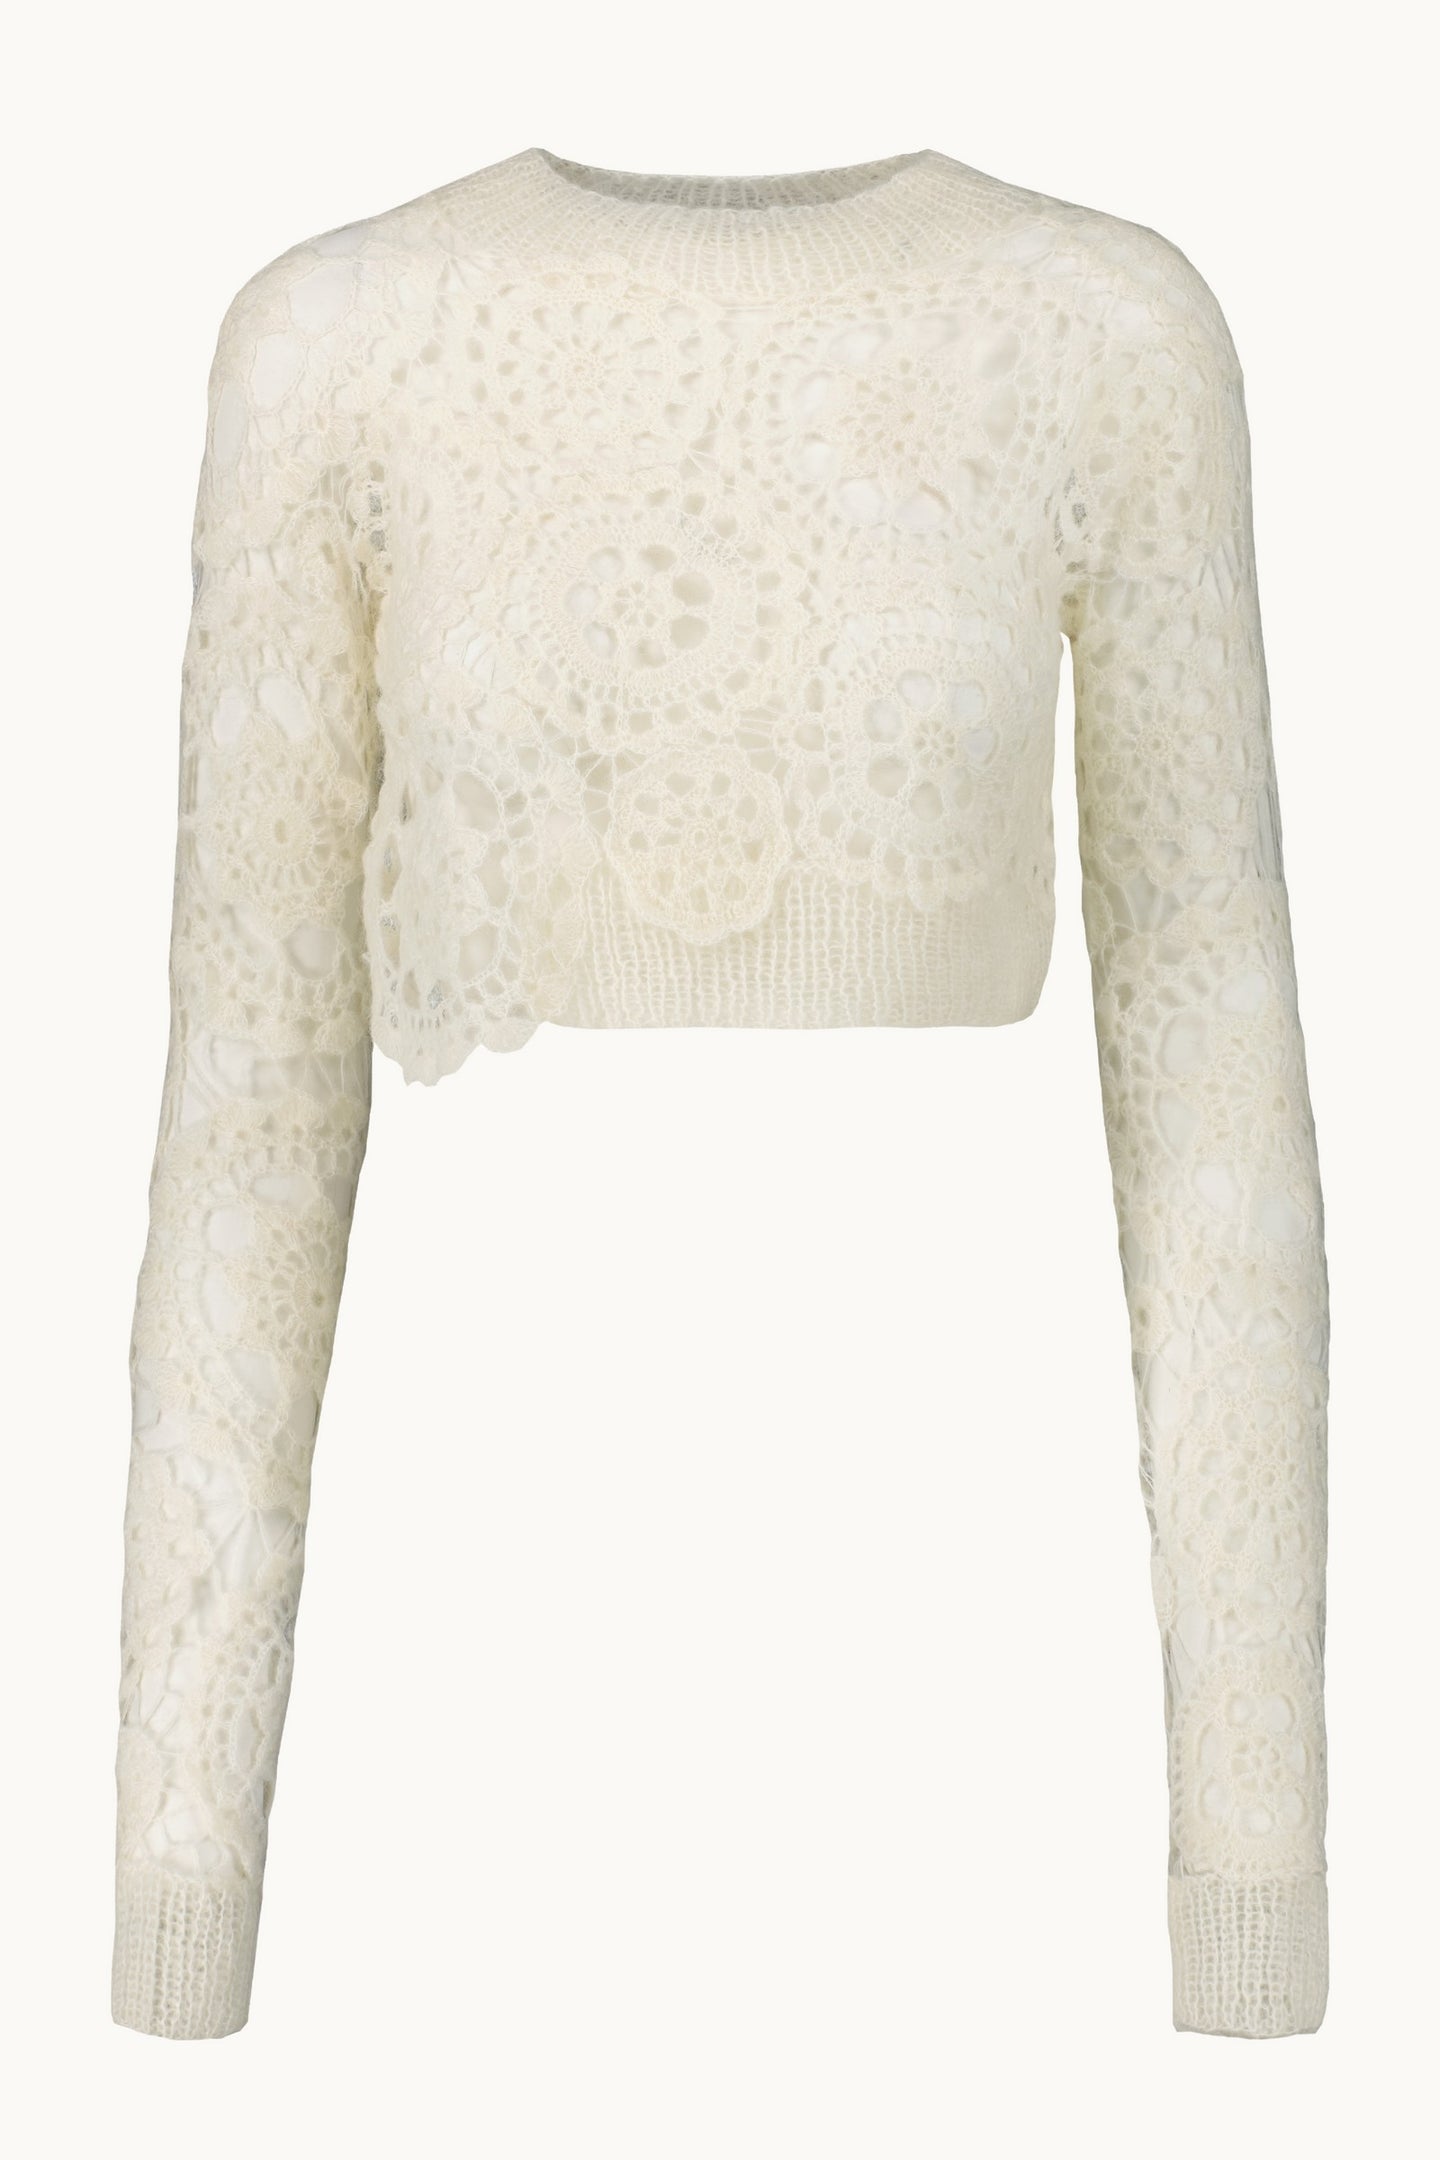 Élonor ivory sweater front view